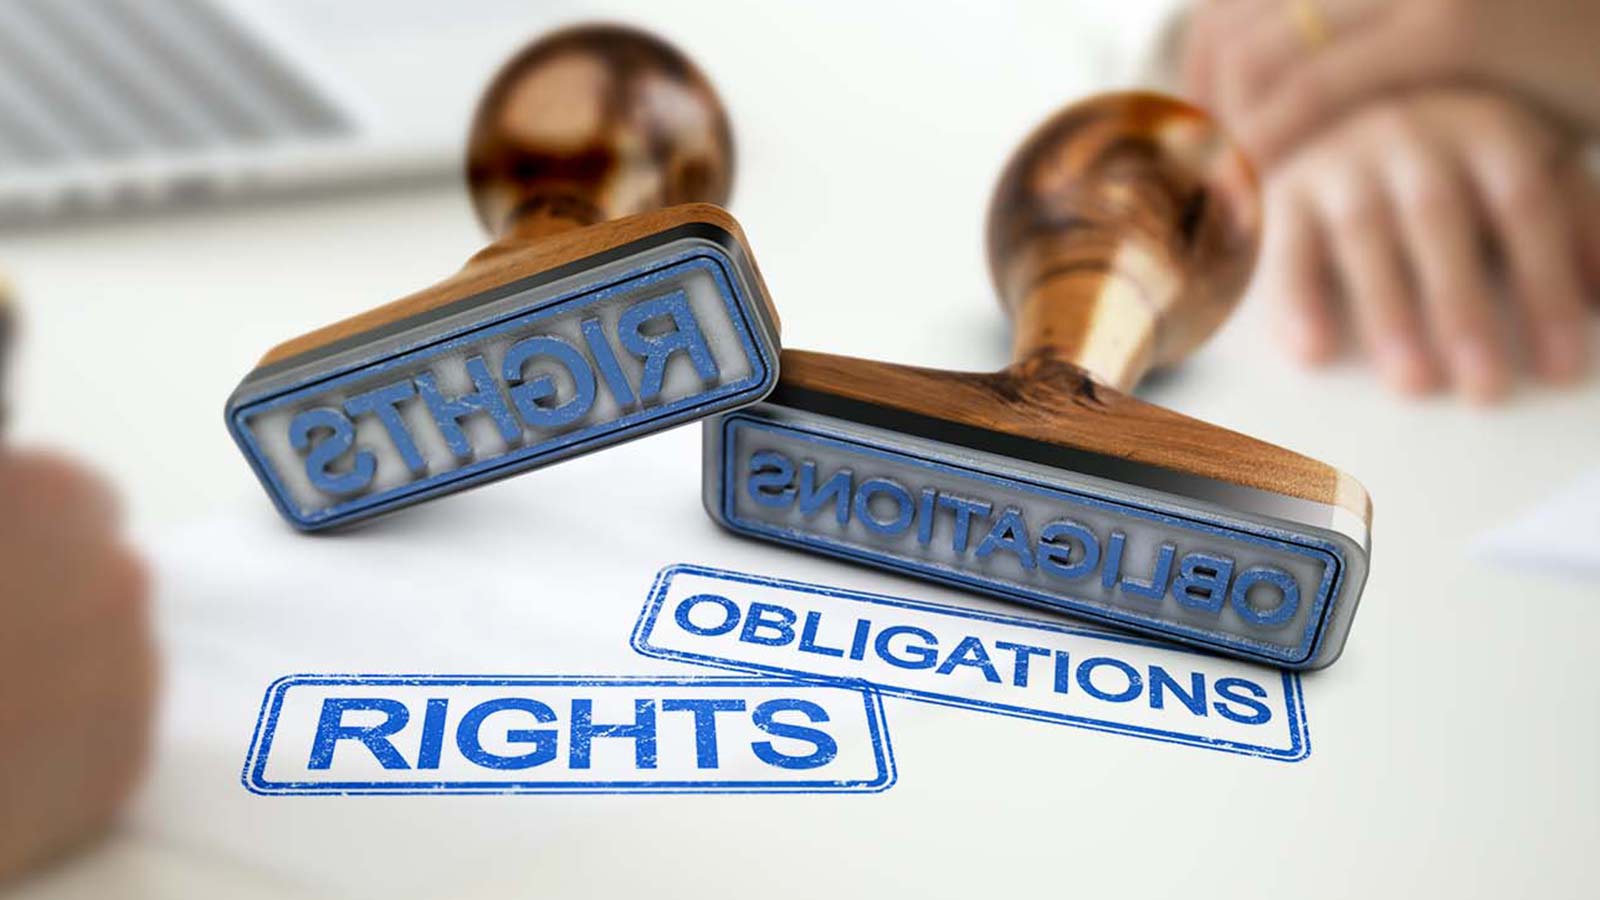 Casino Player Rights and Obligations